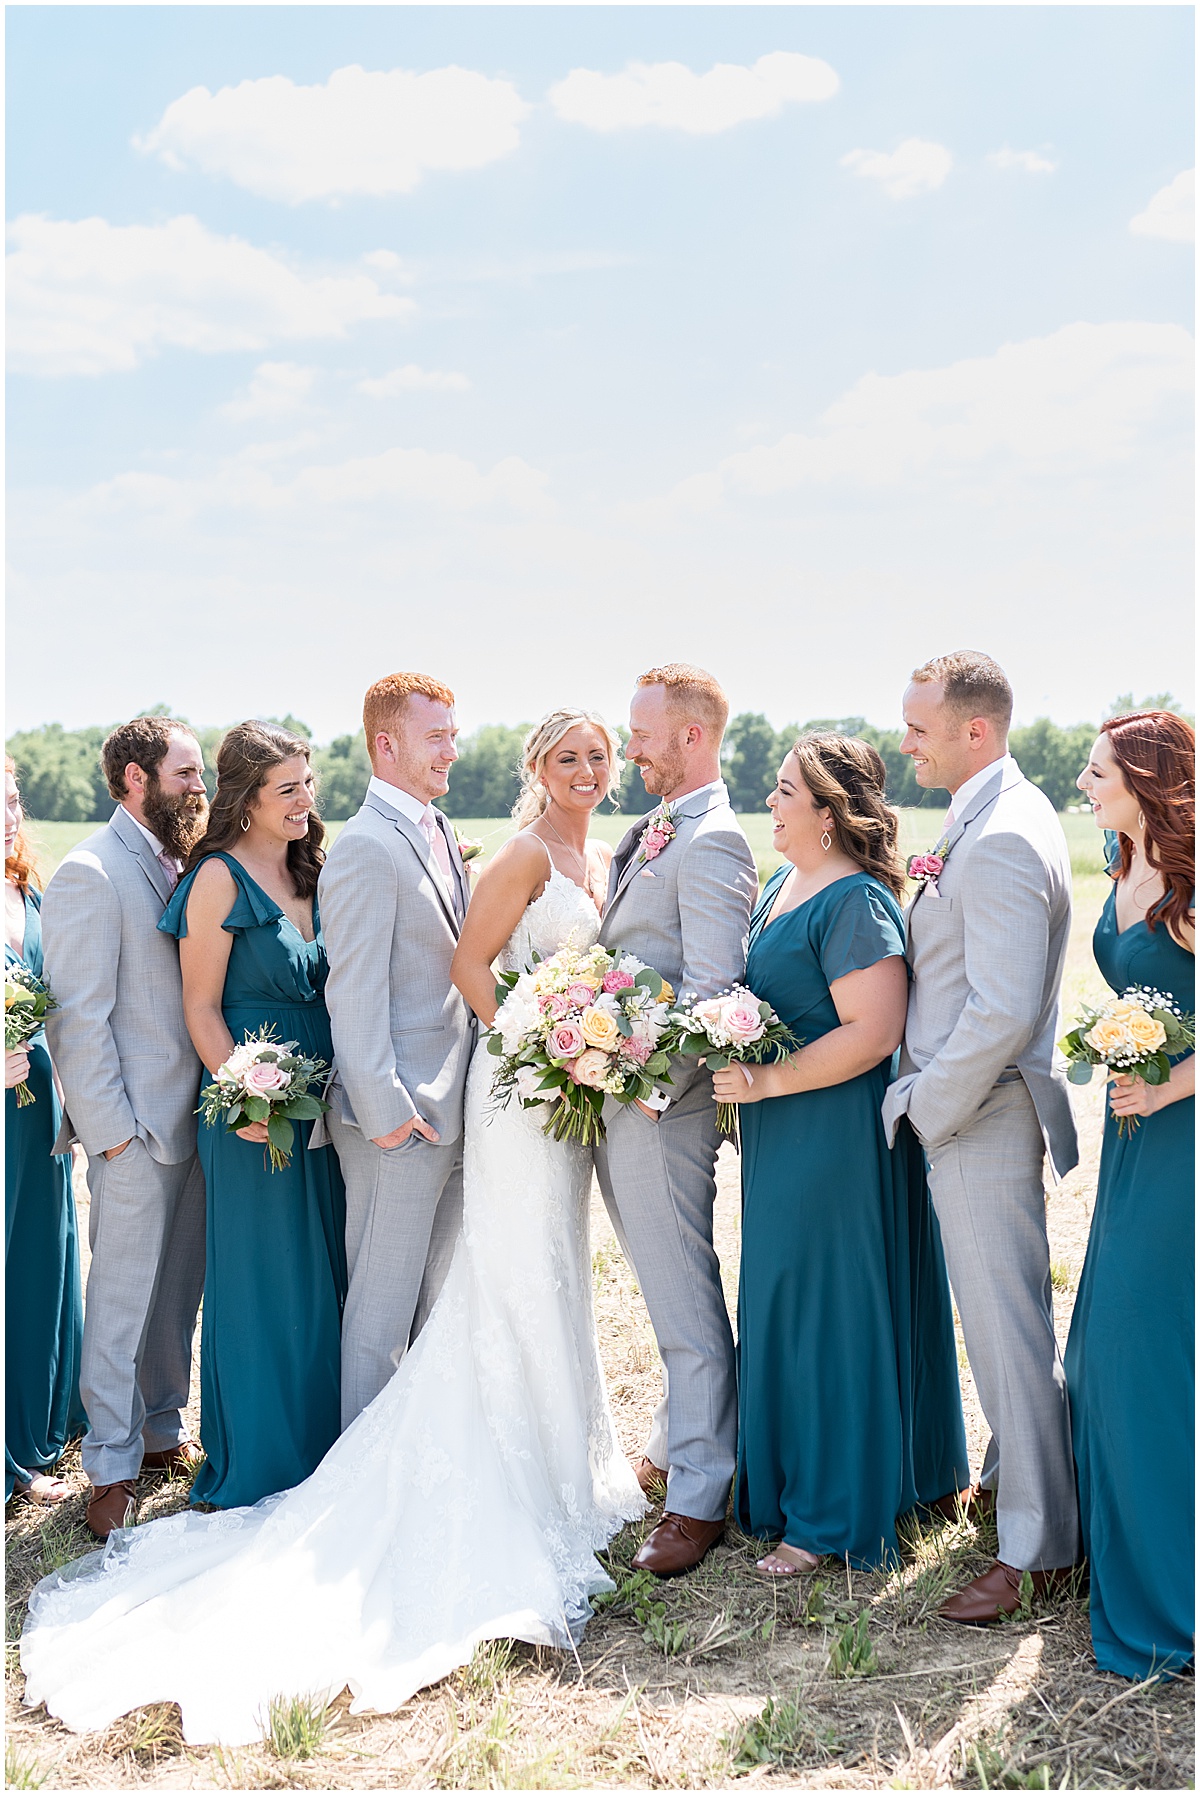 Bridal party laugh together before wedding at New Journey Farms in Lafayette, Indiana